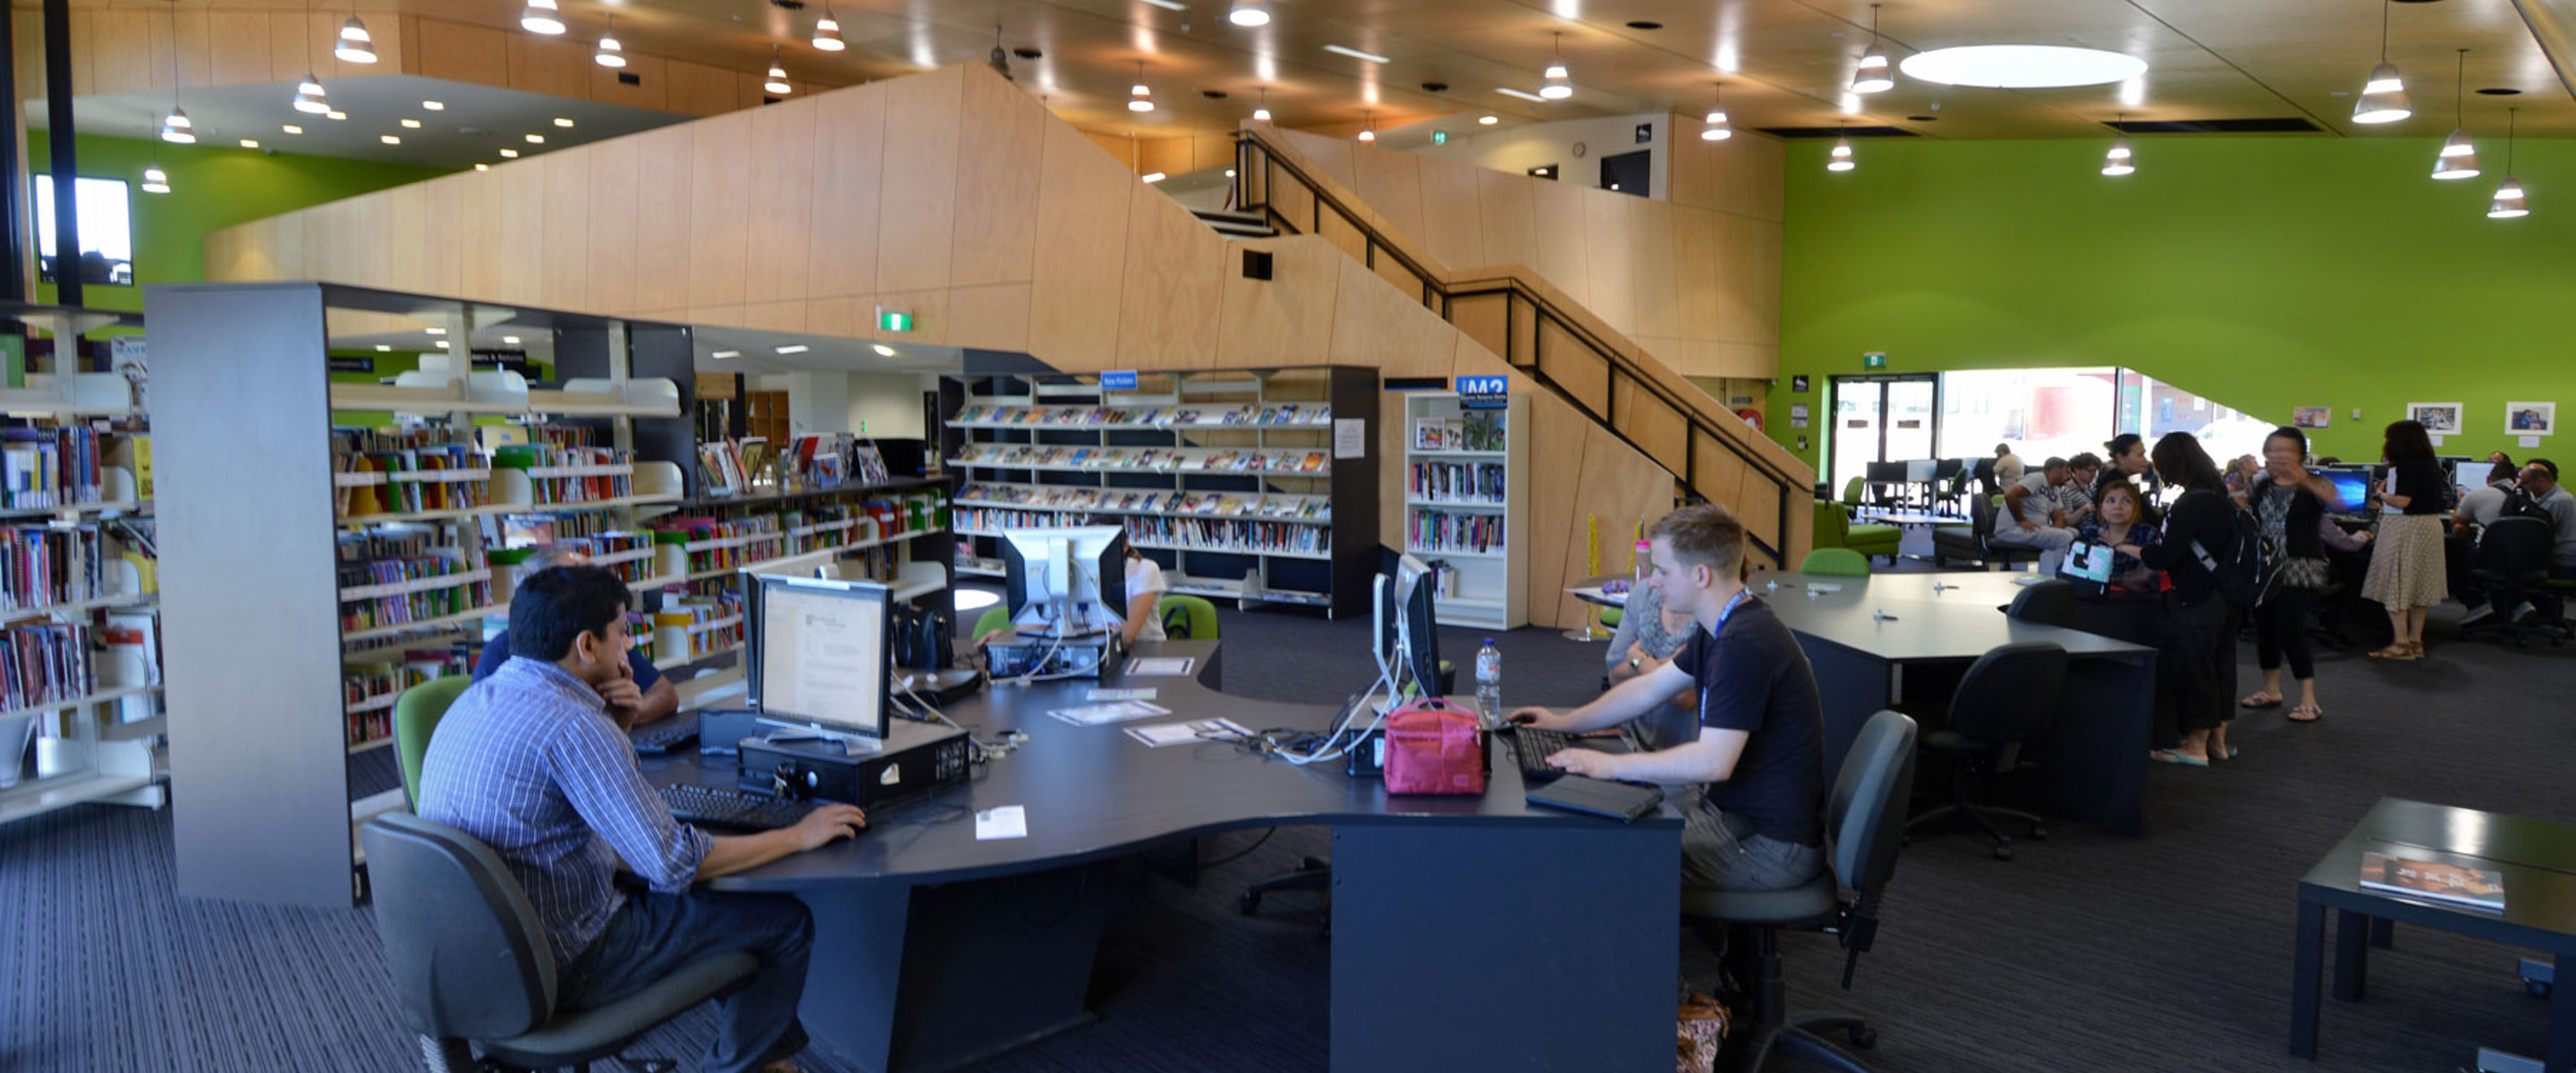 Students working in the bustling Epping library